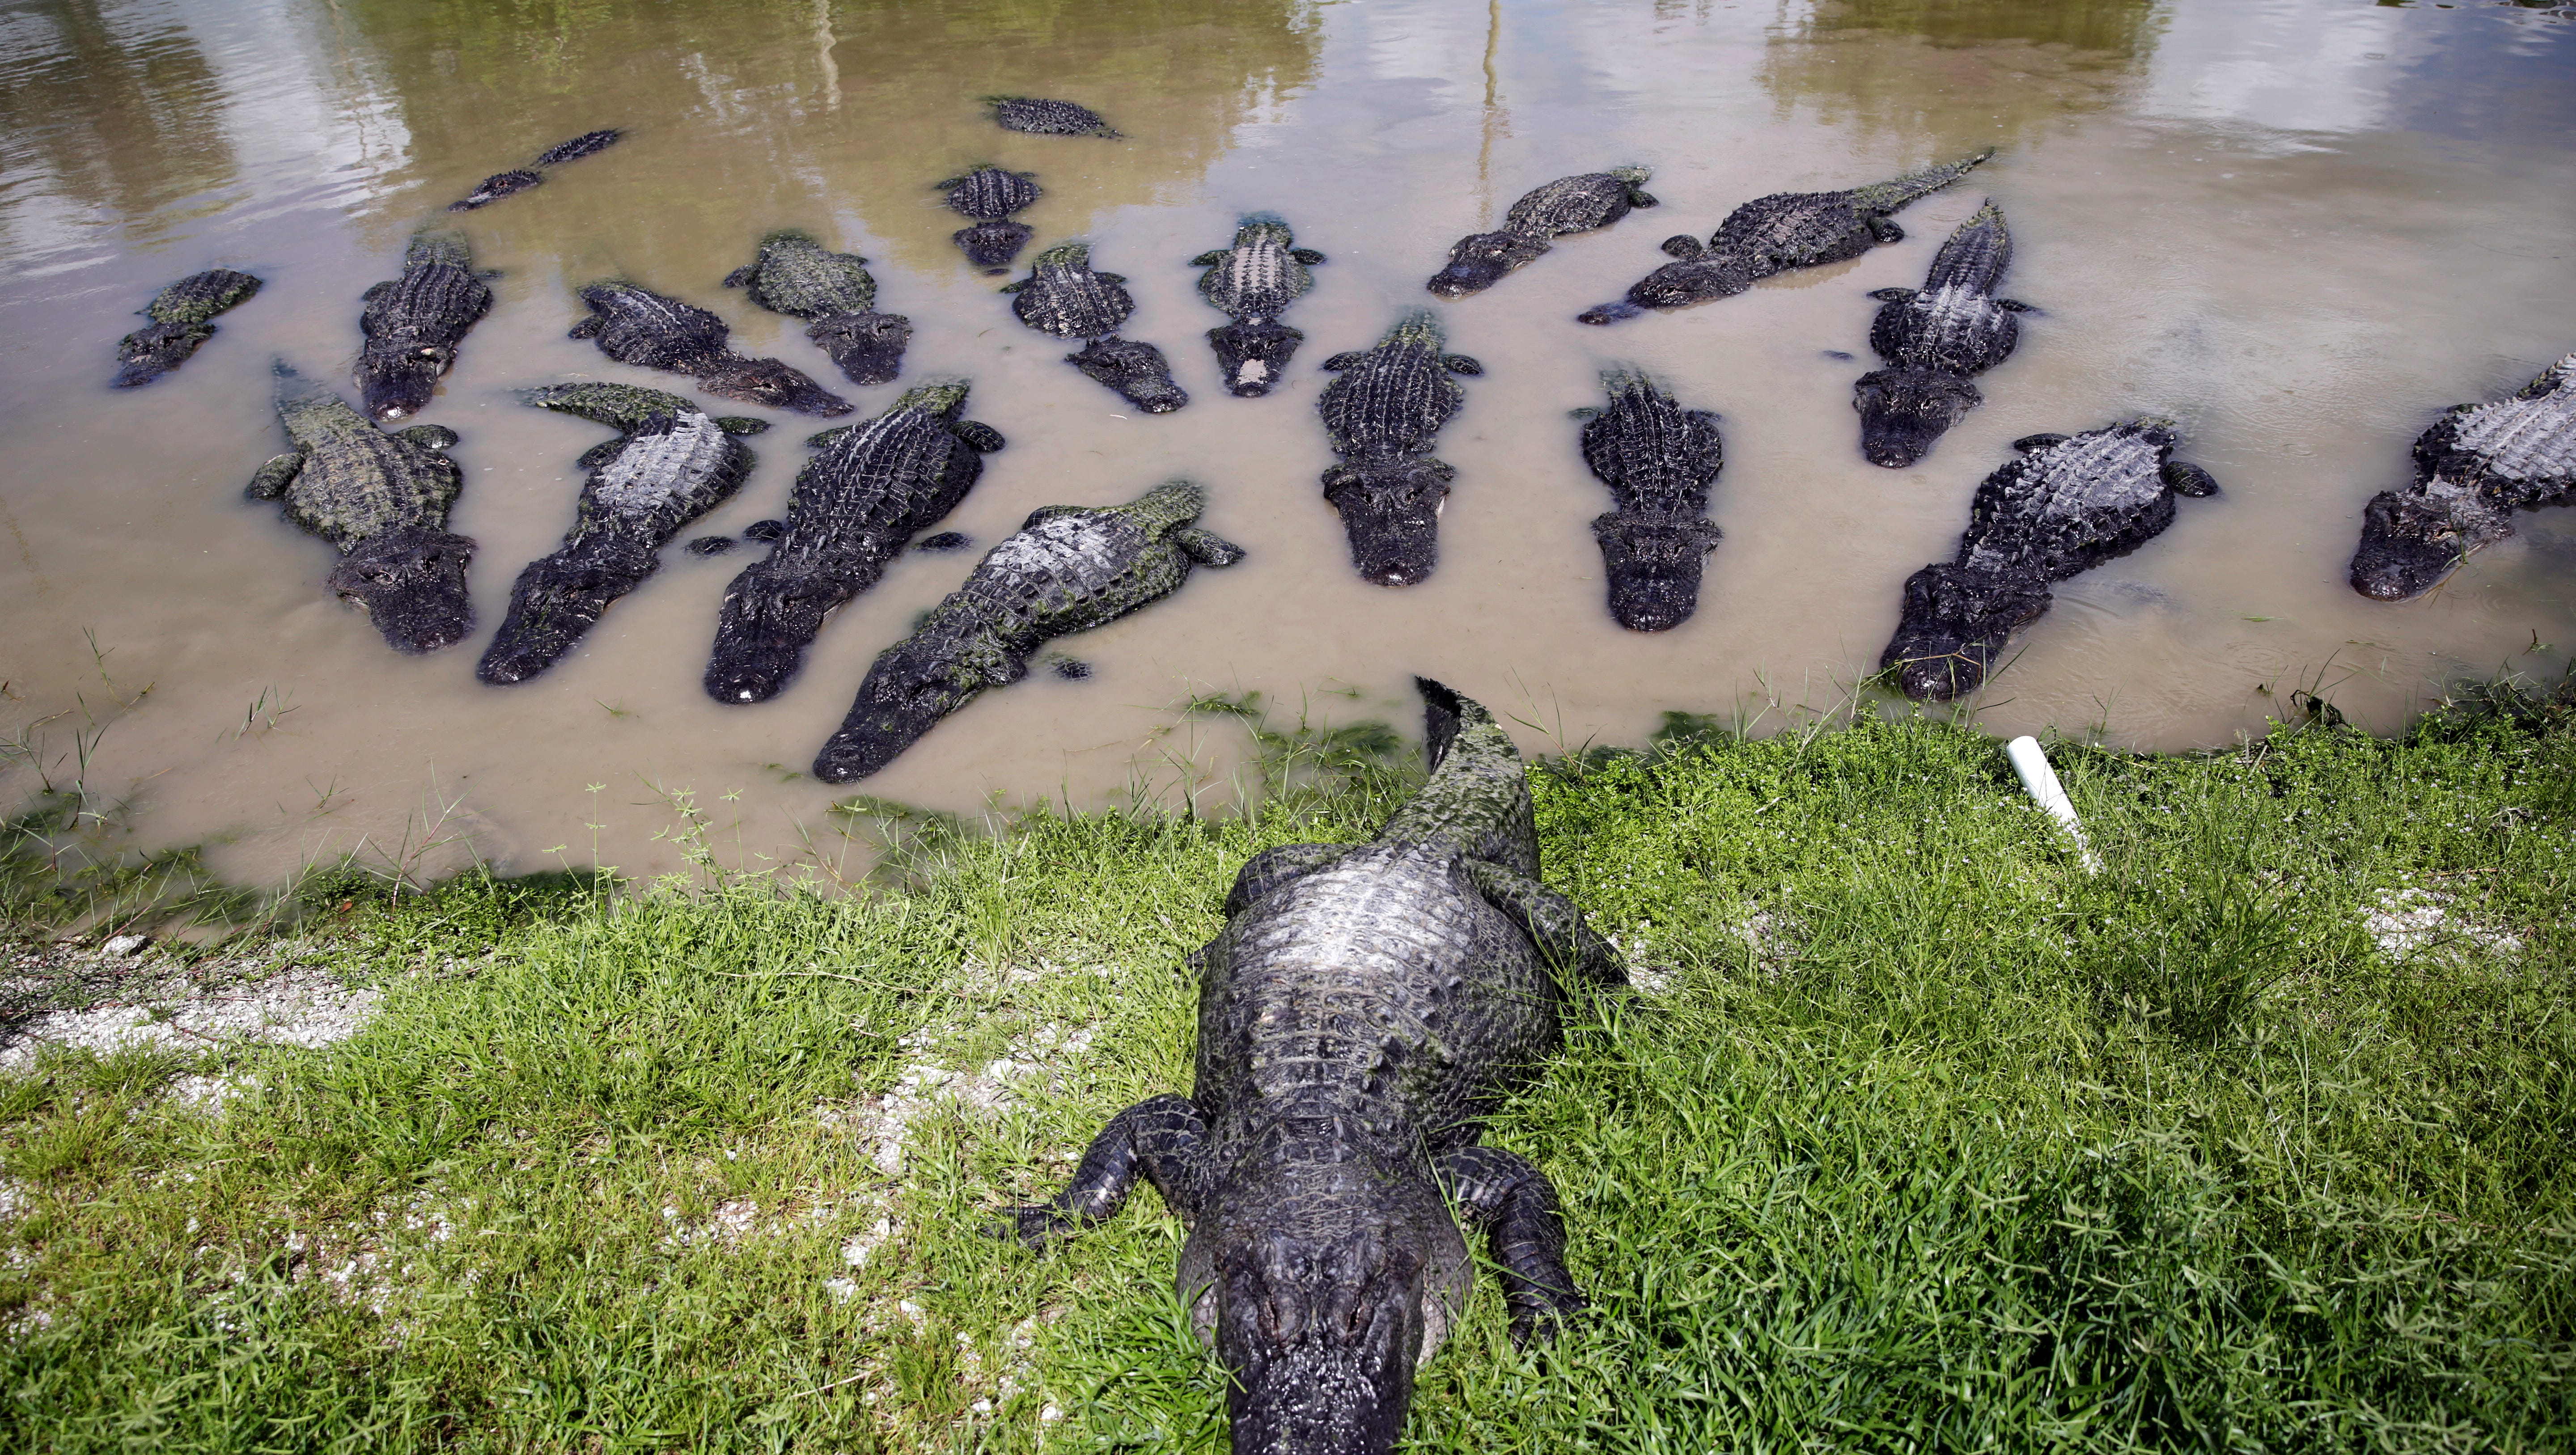 Where Can I See Alligators in Florida?